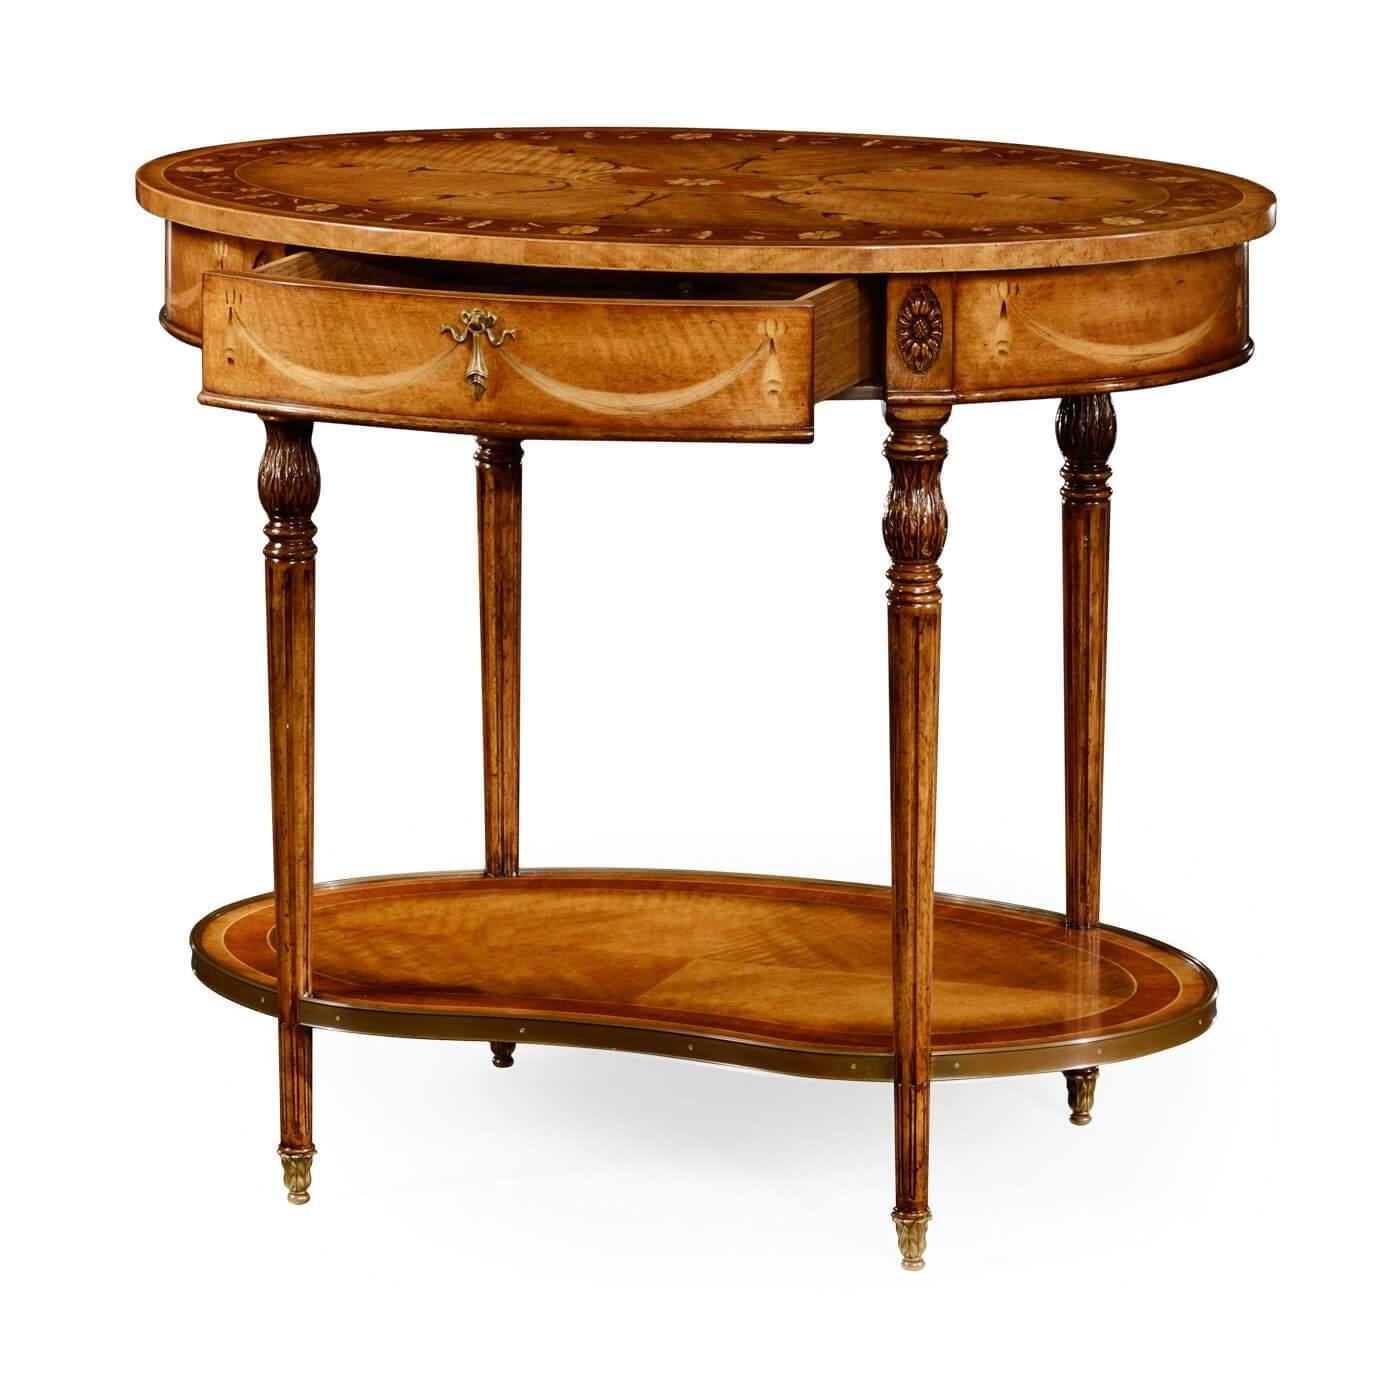 Sheraton inspired finely inlaid oval side table with swagged classical inlaid motifs, a perfectly matched bowknot and tassel drop handle, and a solid oak lined single drawer above a kidney-shaped under tier, with four acanthus carved capitals and